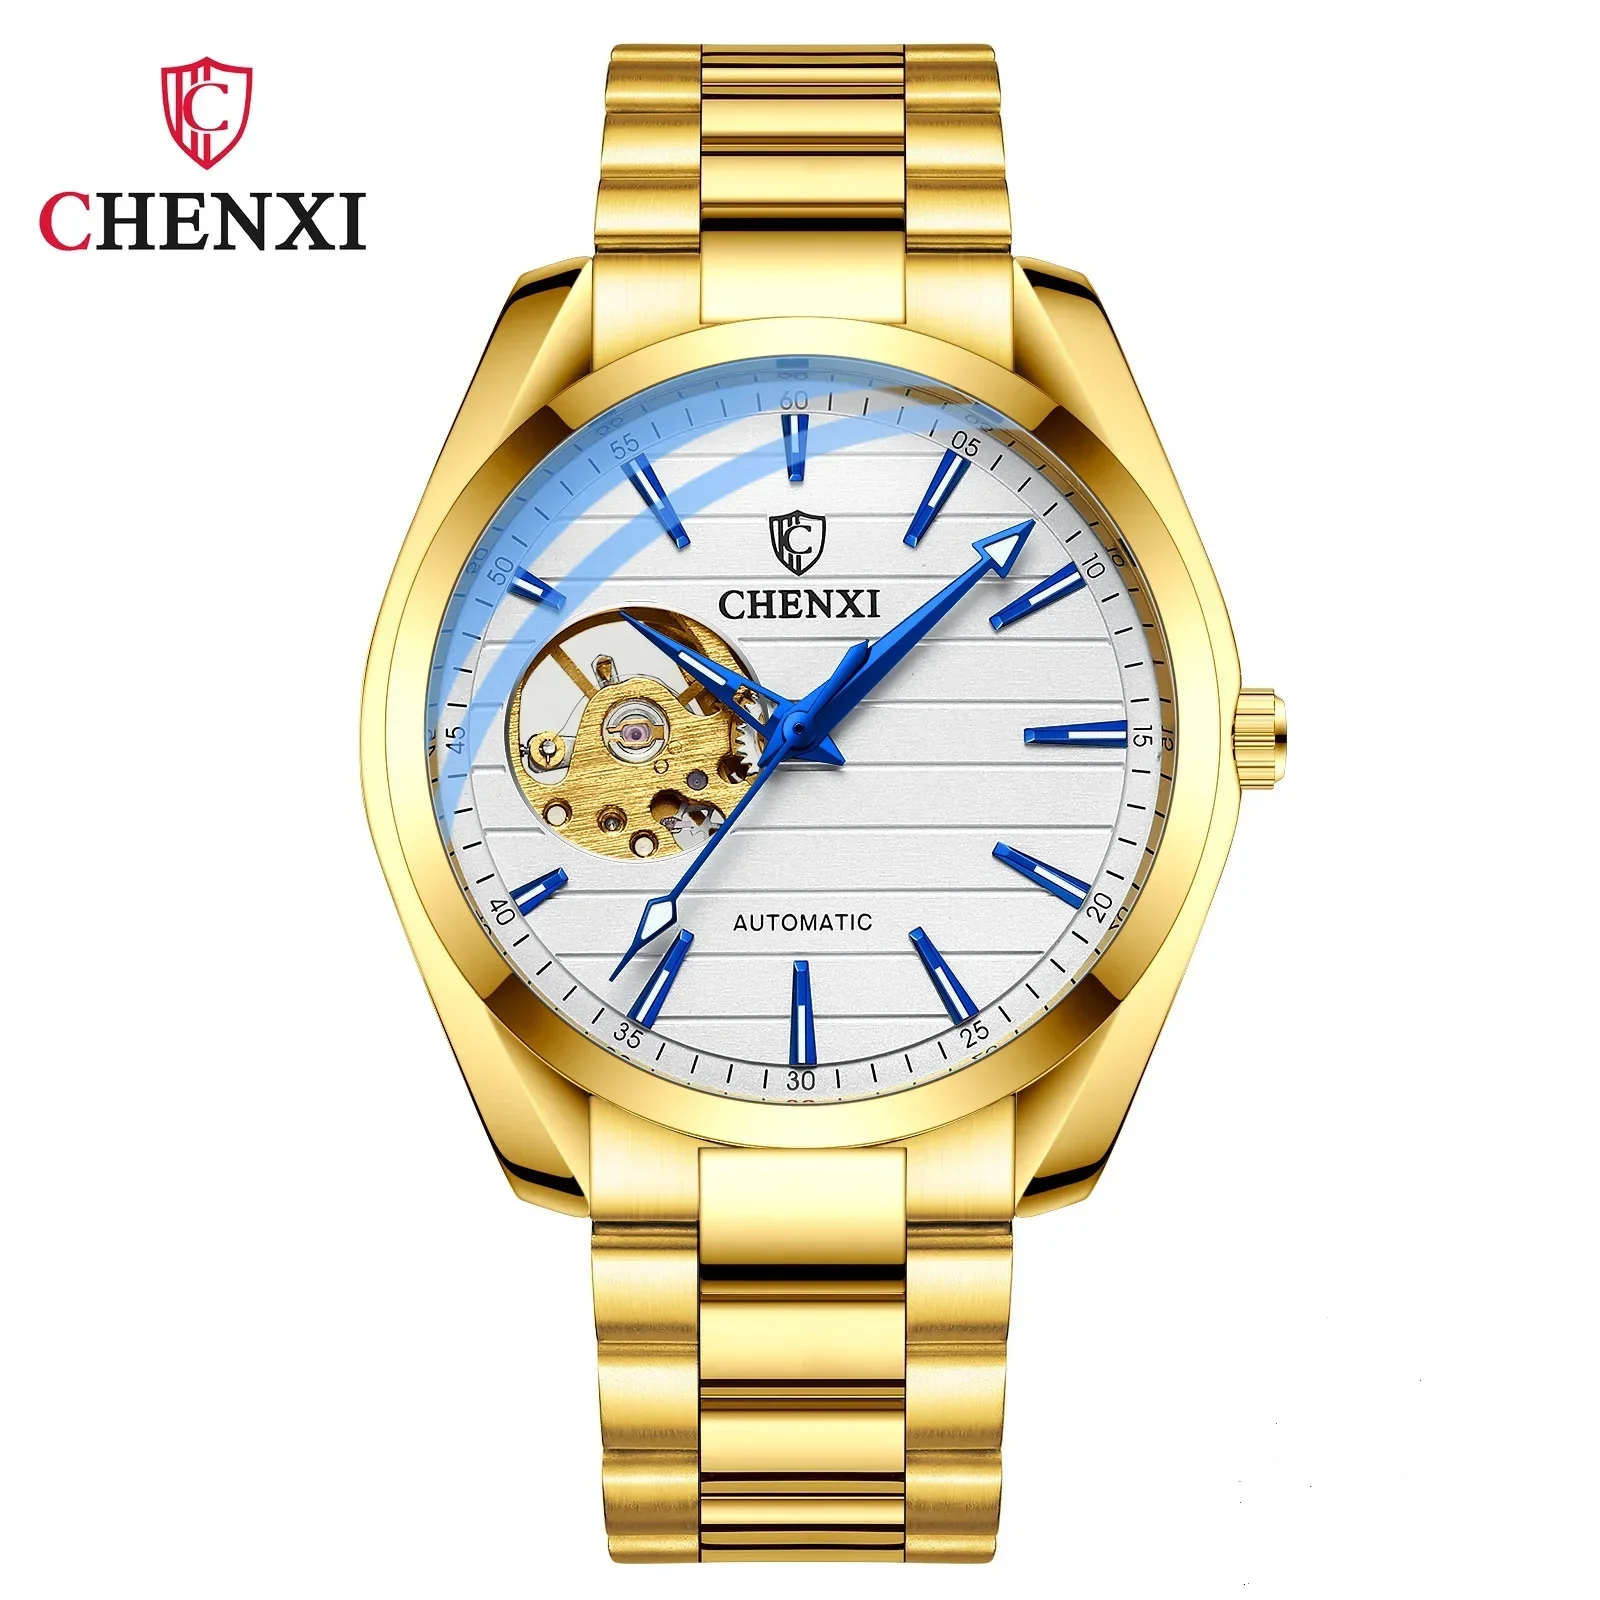 

CHENXI Top Brand Luxury Gold Men Watches Sapphire Glass Stainless Steel Band Automatic Mechanical Wristwatches Men Reloj Hombre